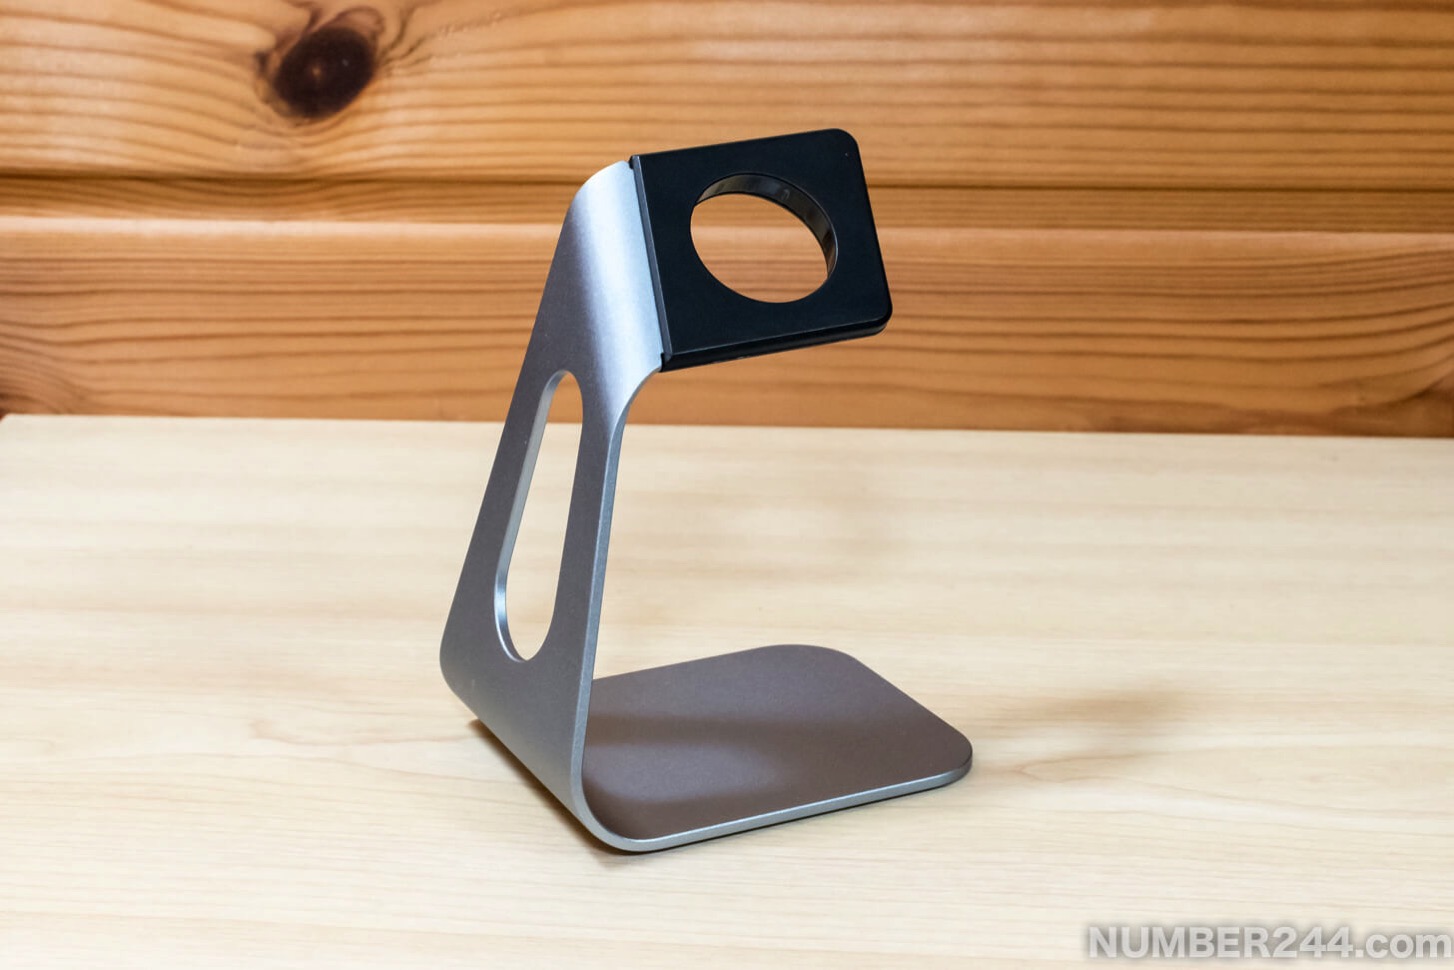 Moobom Apple Watch stand1